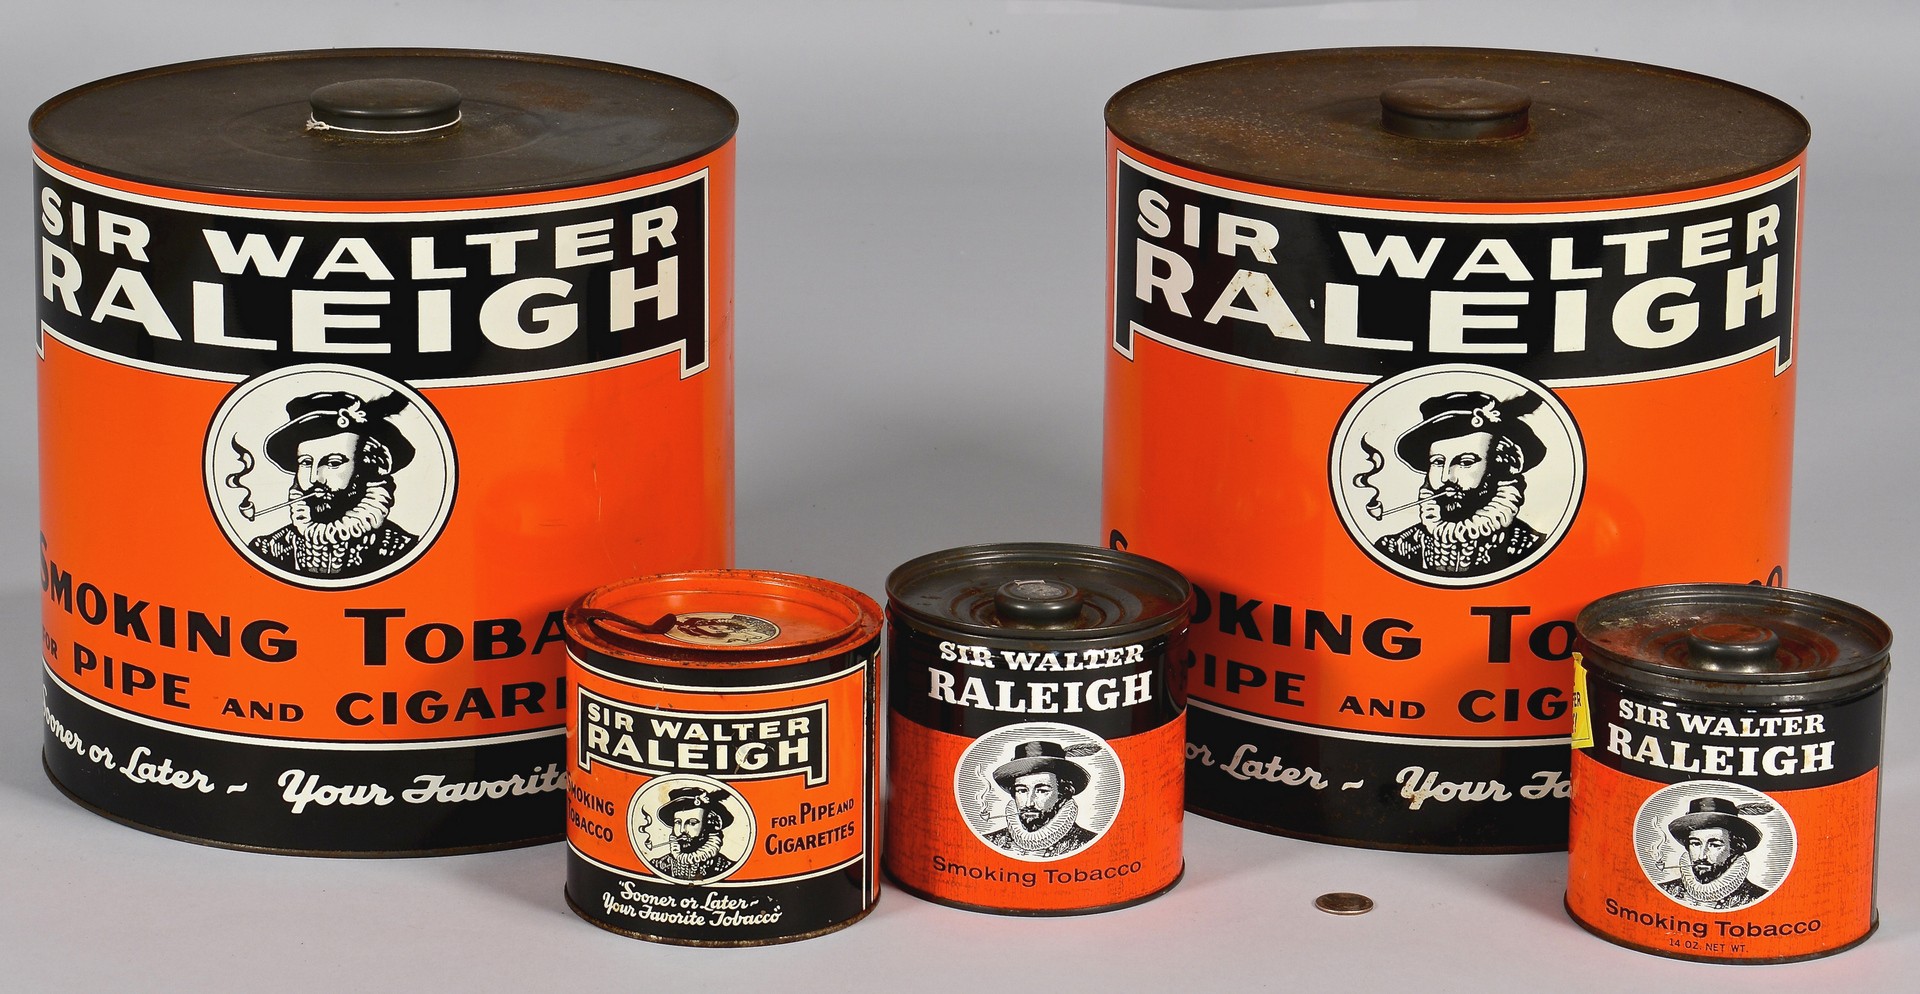 Lot 860: Group of Sir Walter Raleigh Tobacco Tins, 5 pc